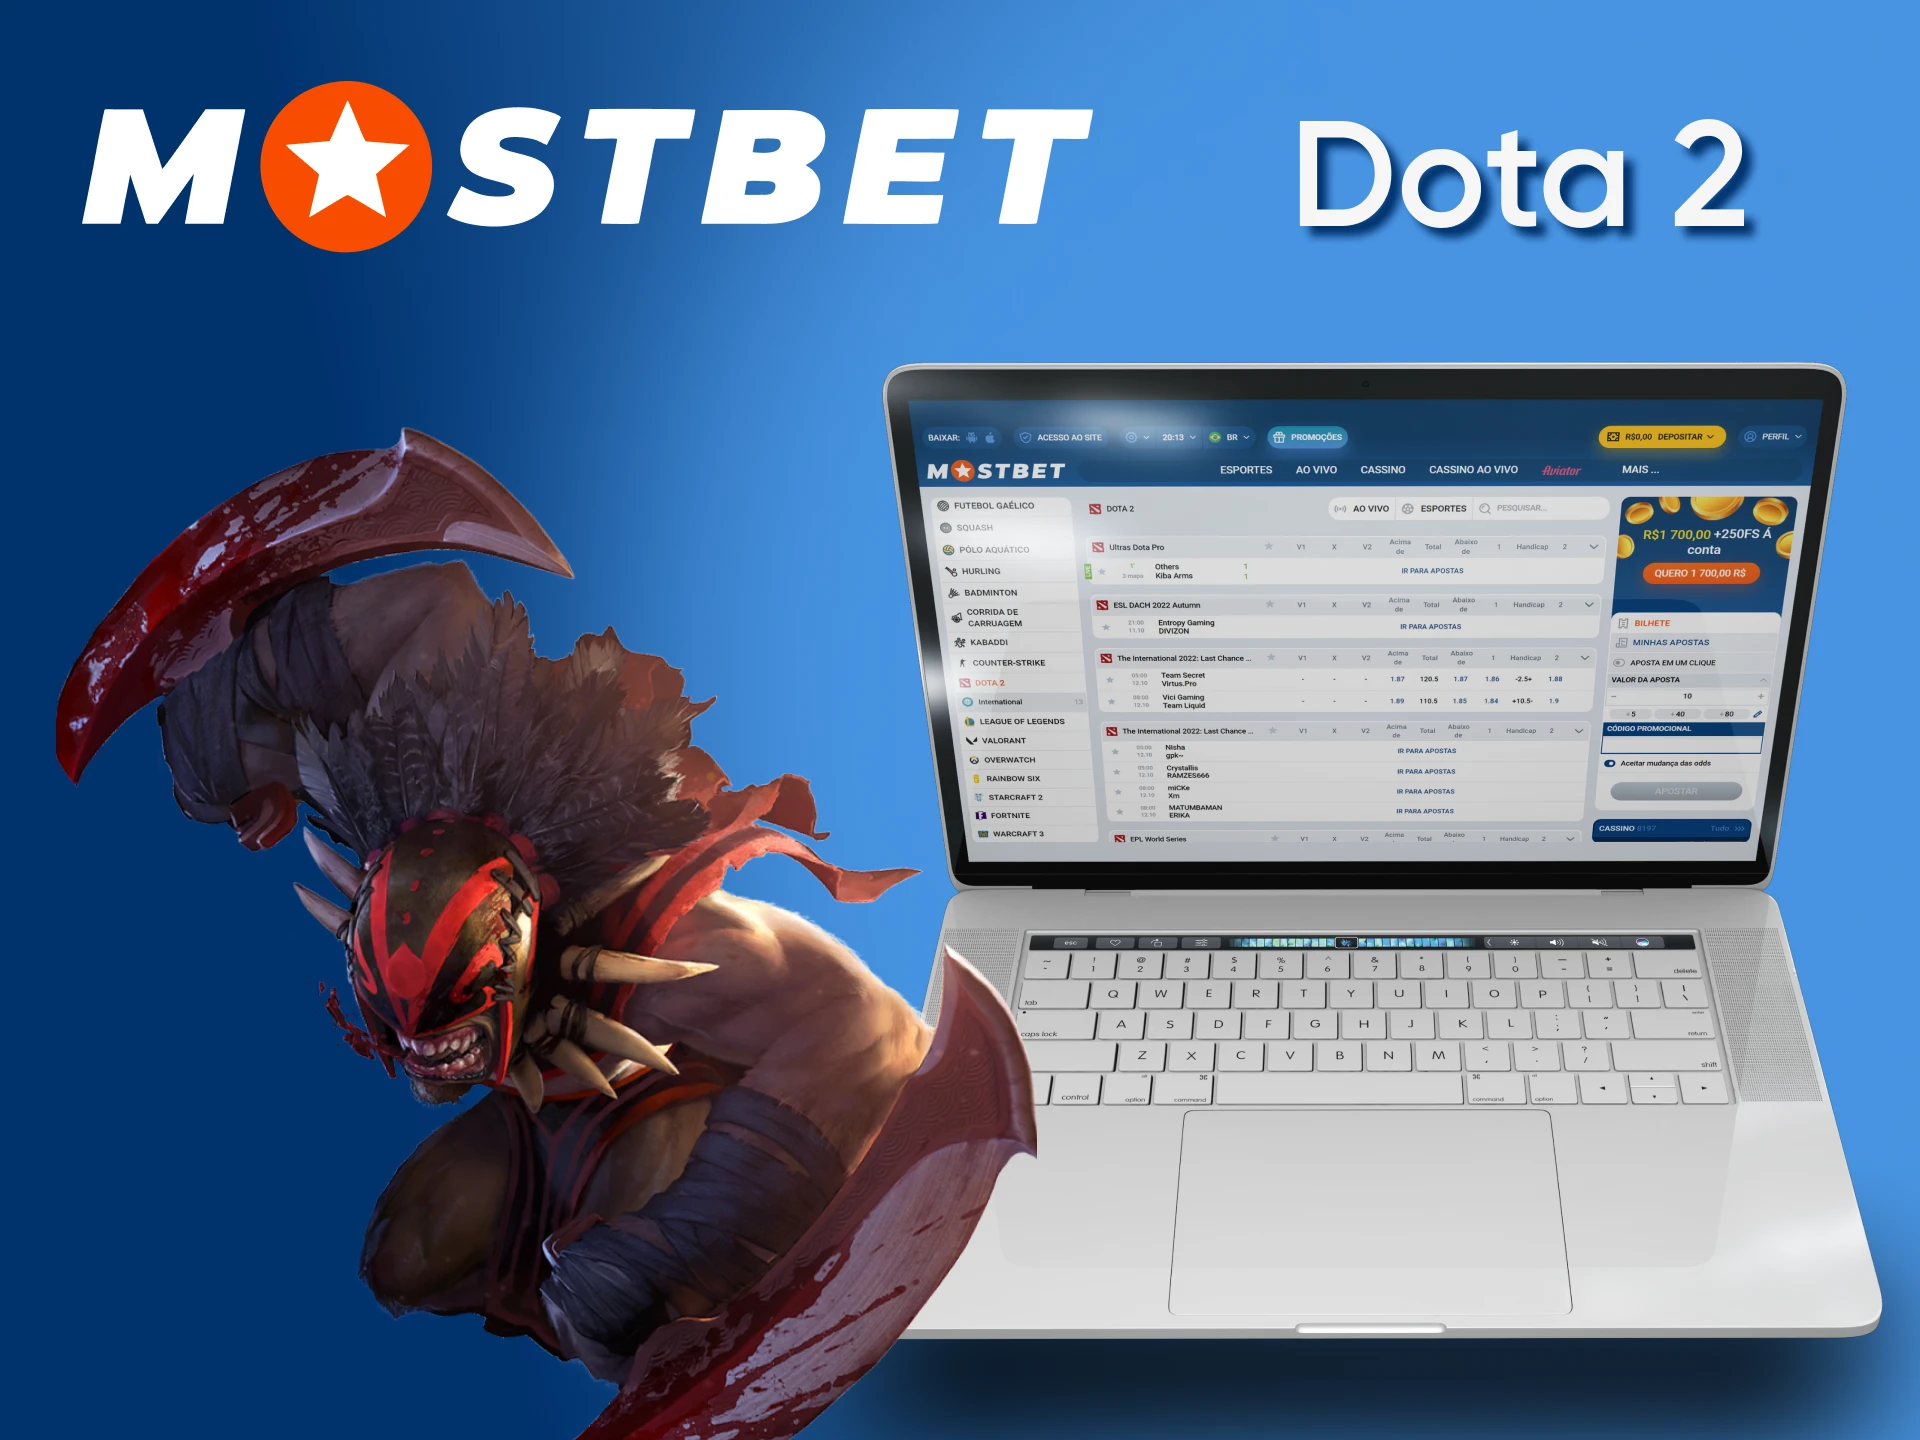 Bet on Dota 2 with Mostbet.